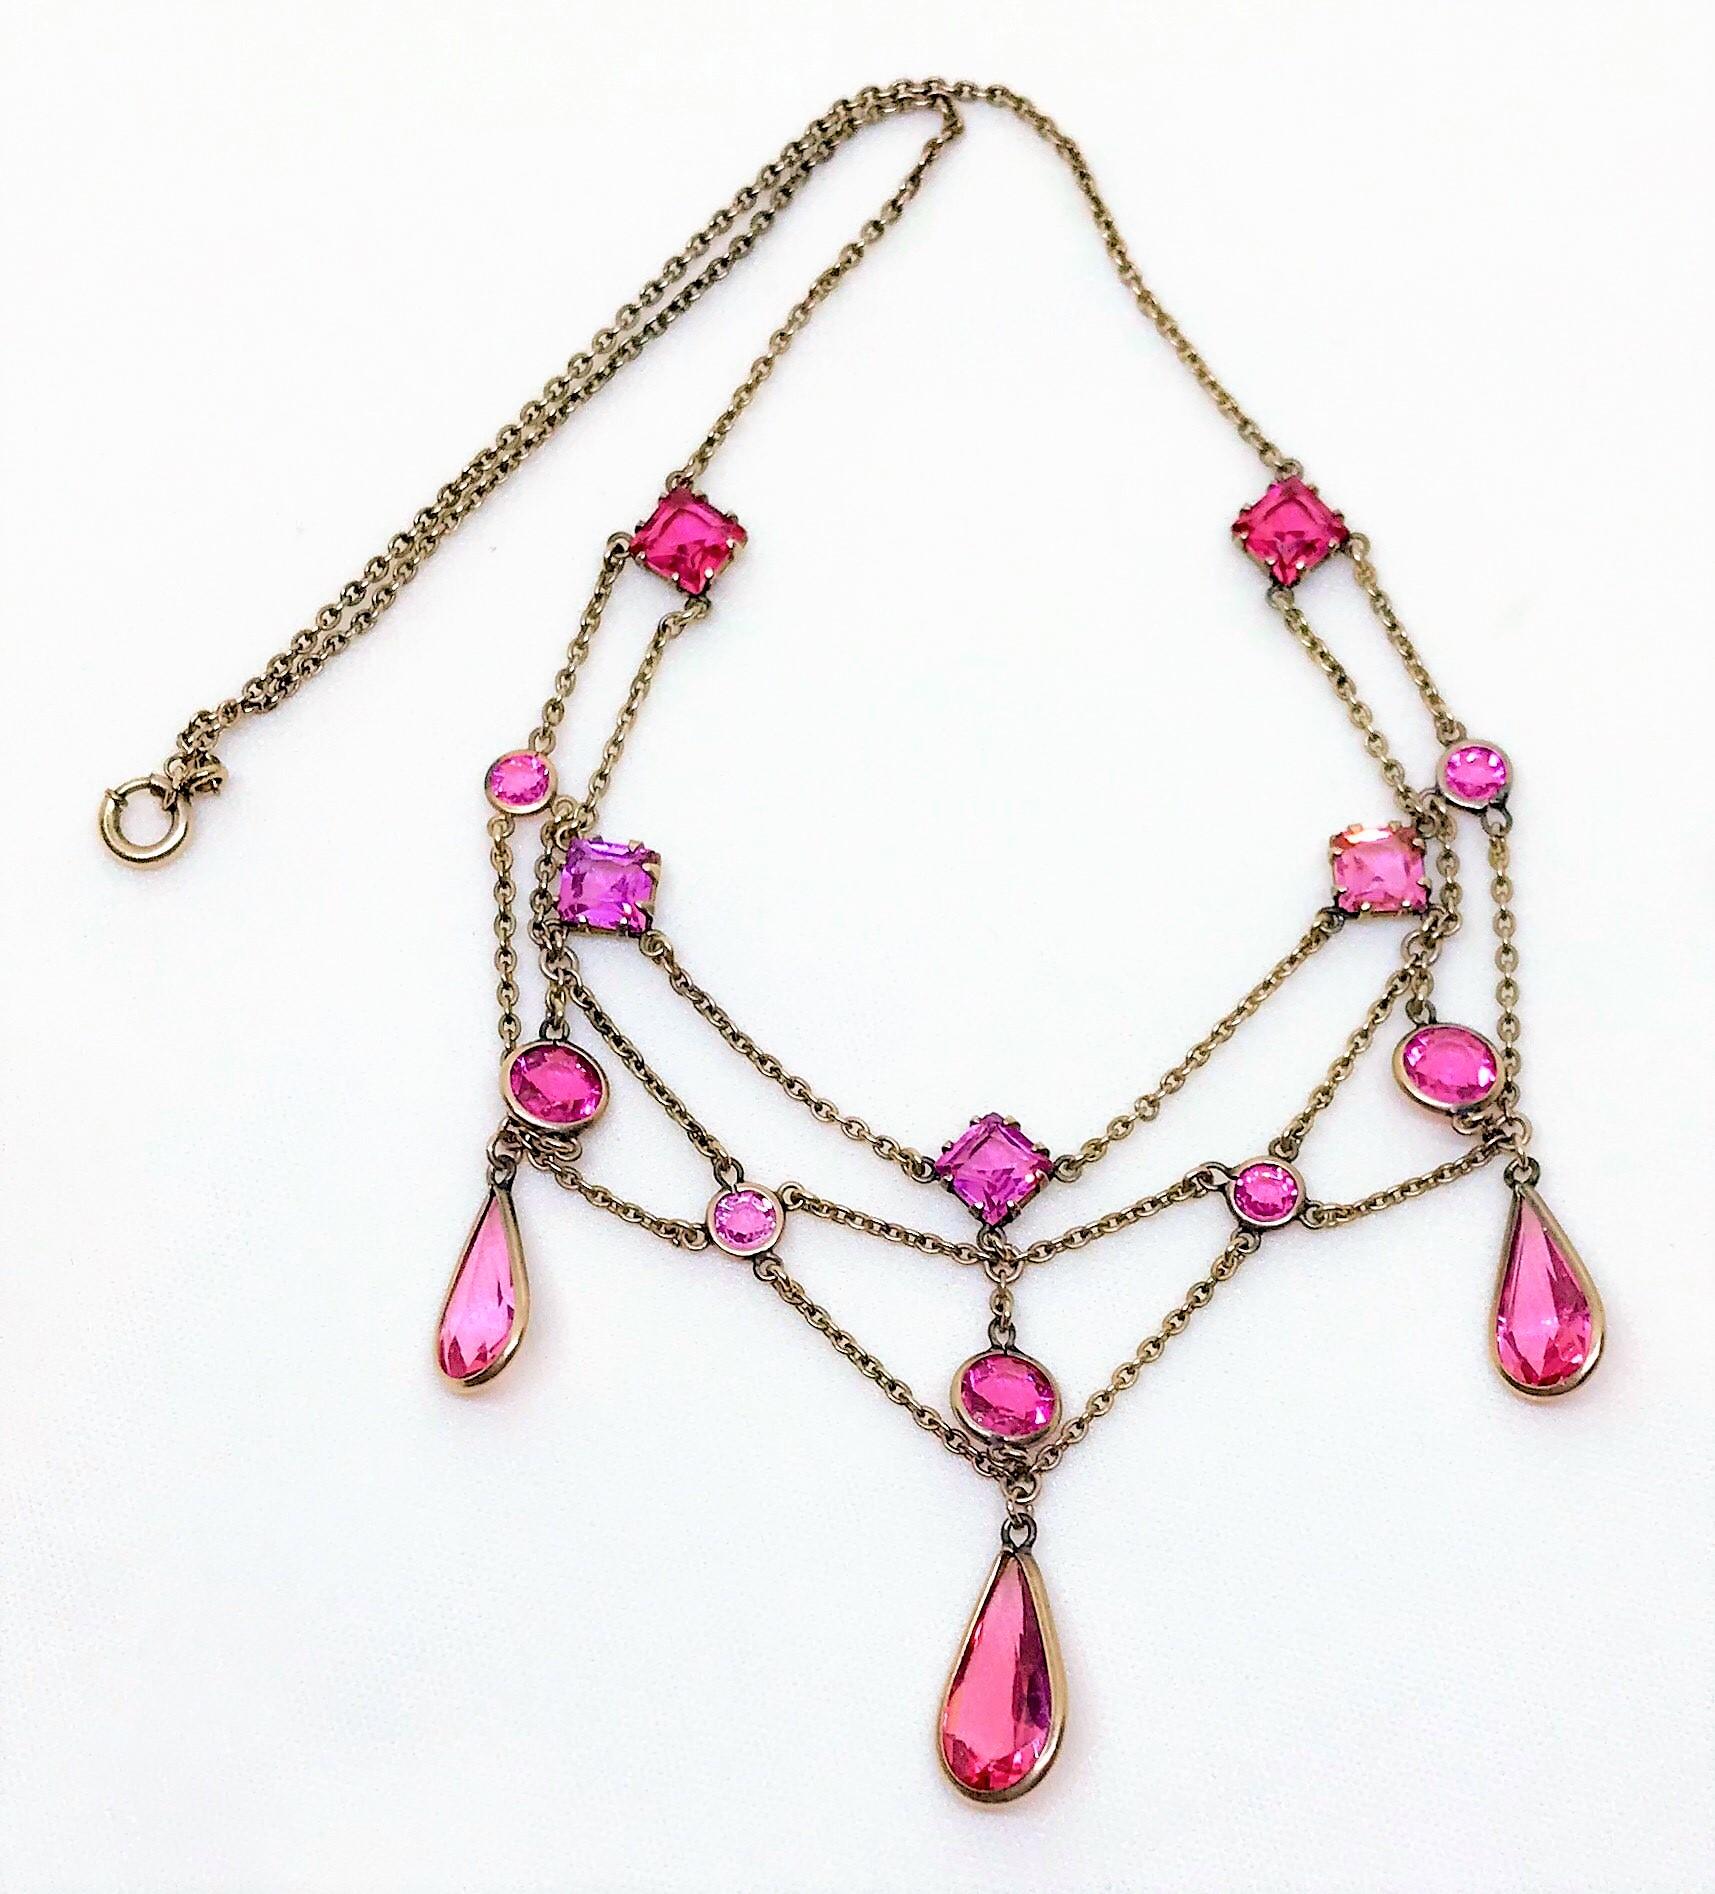 Early 1900s Gold-Filled and Pink Faceted Glass Festoon Necklace In Good Condition For Sale In Long Beach, CA